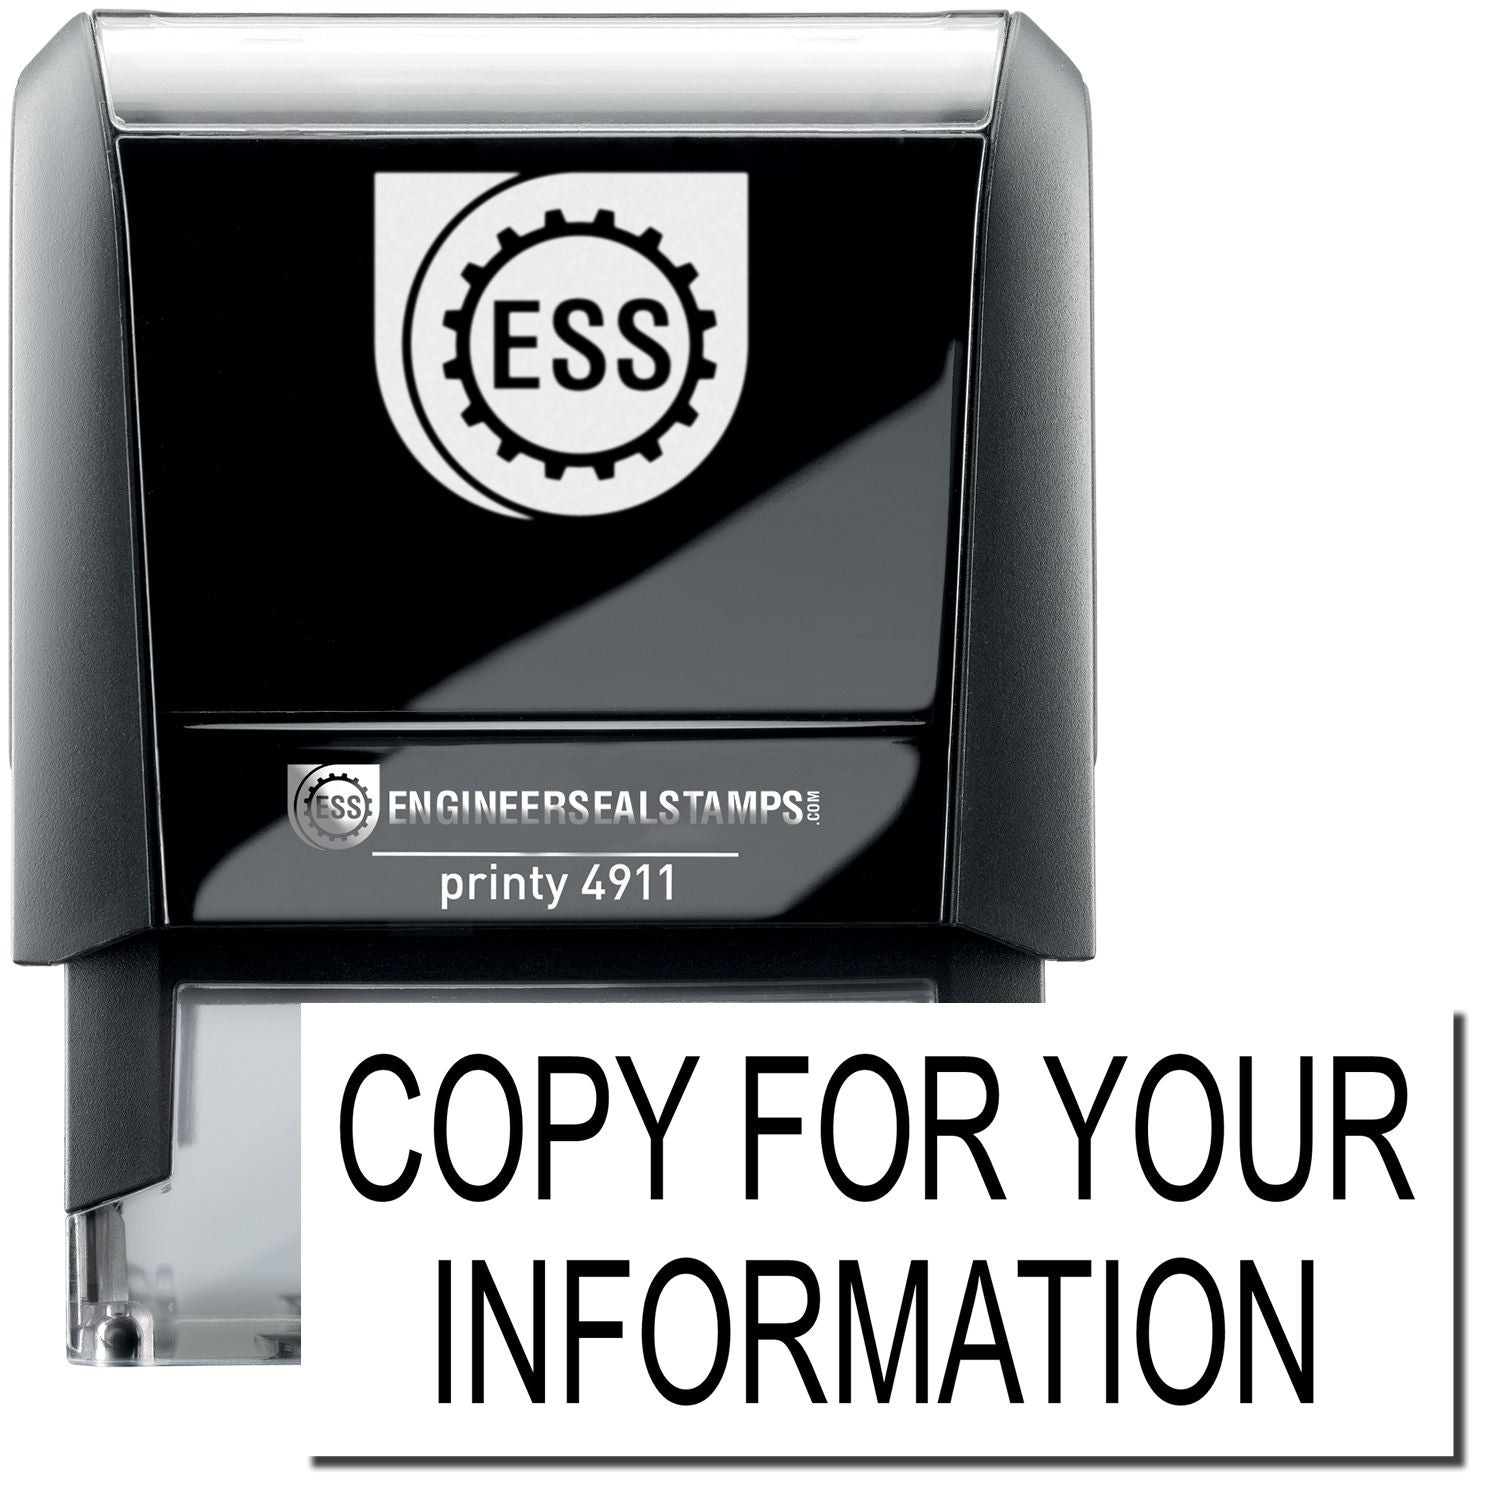 A self-inking stamp with a stamped image showing how the text "COPY FOR YOUR INFORMATION" is displayed after stamping.